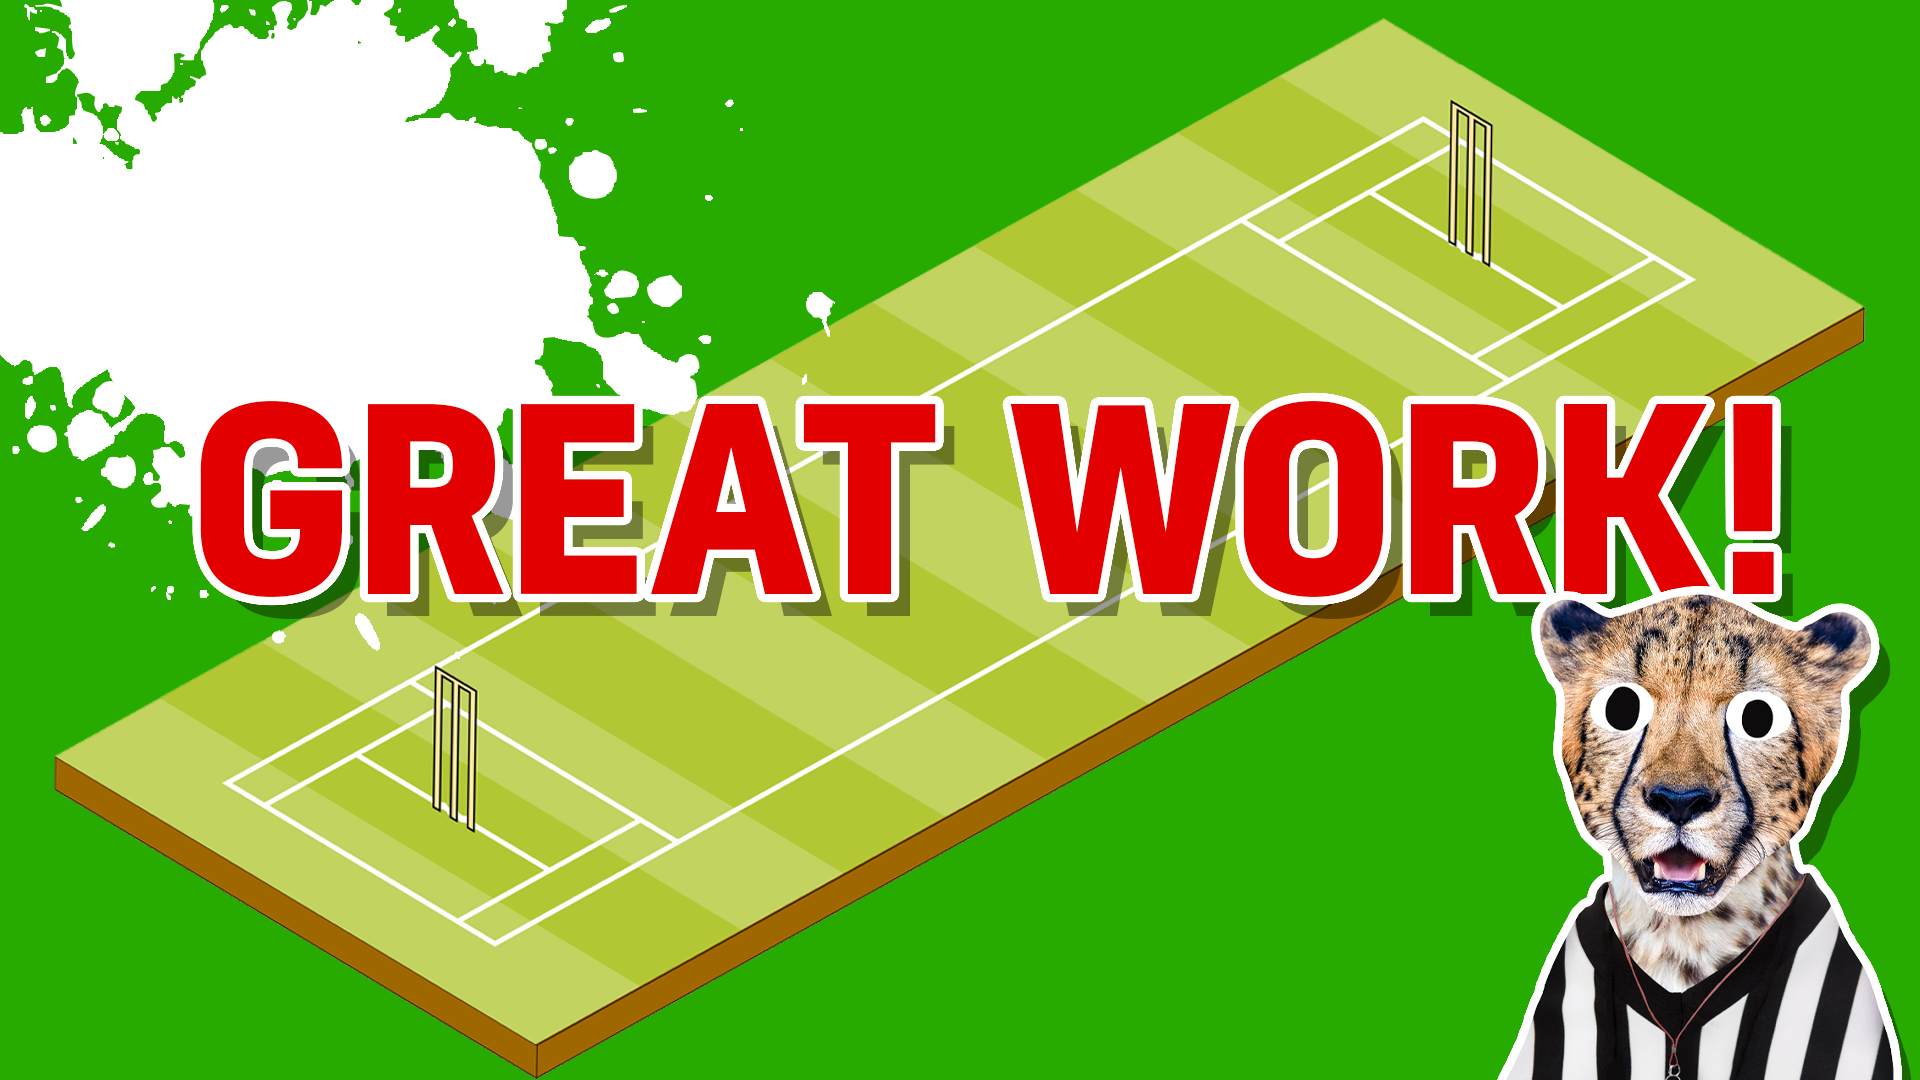 Result: Great work